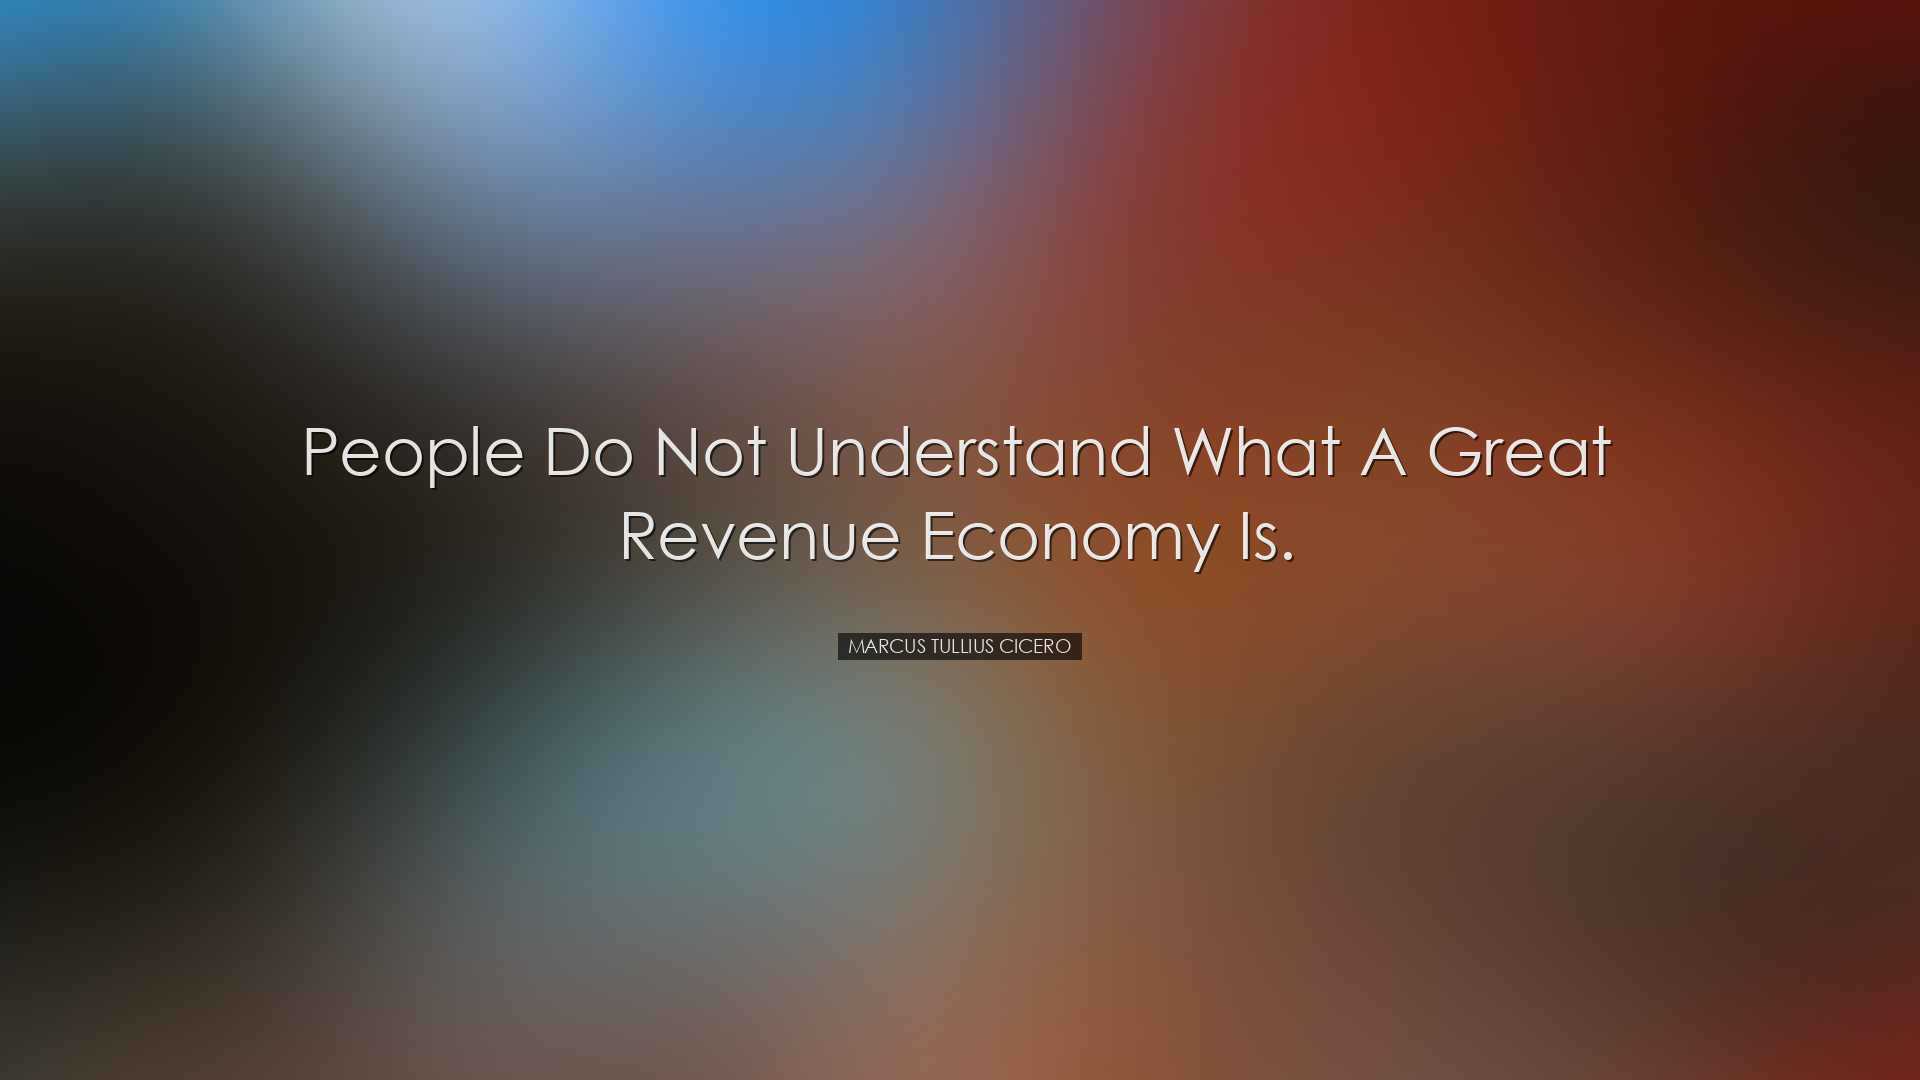 People do not understand what a great revenue economy is. - Marcus